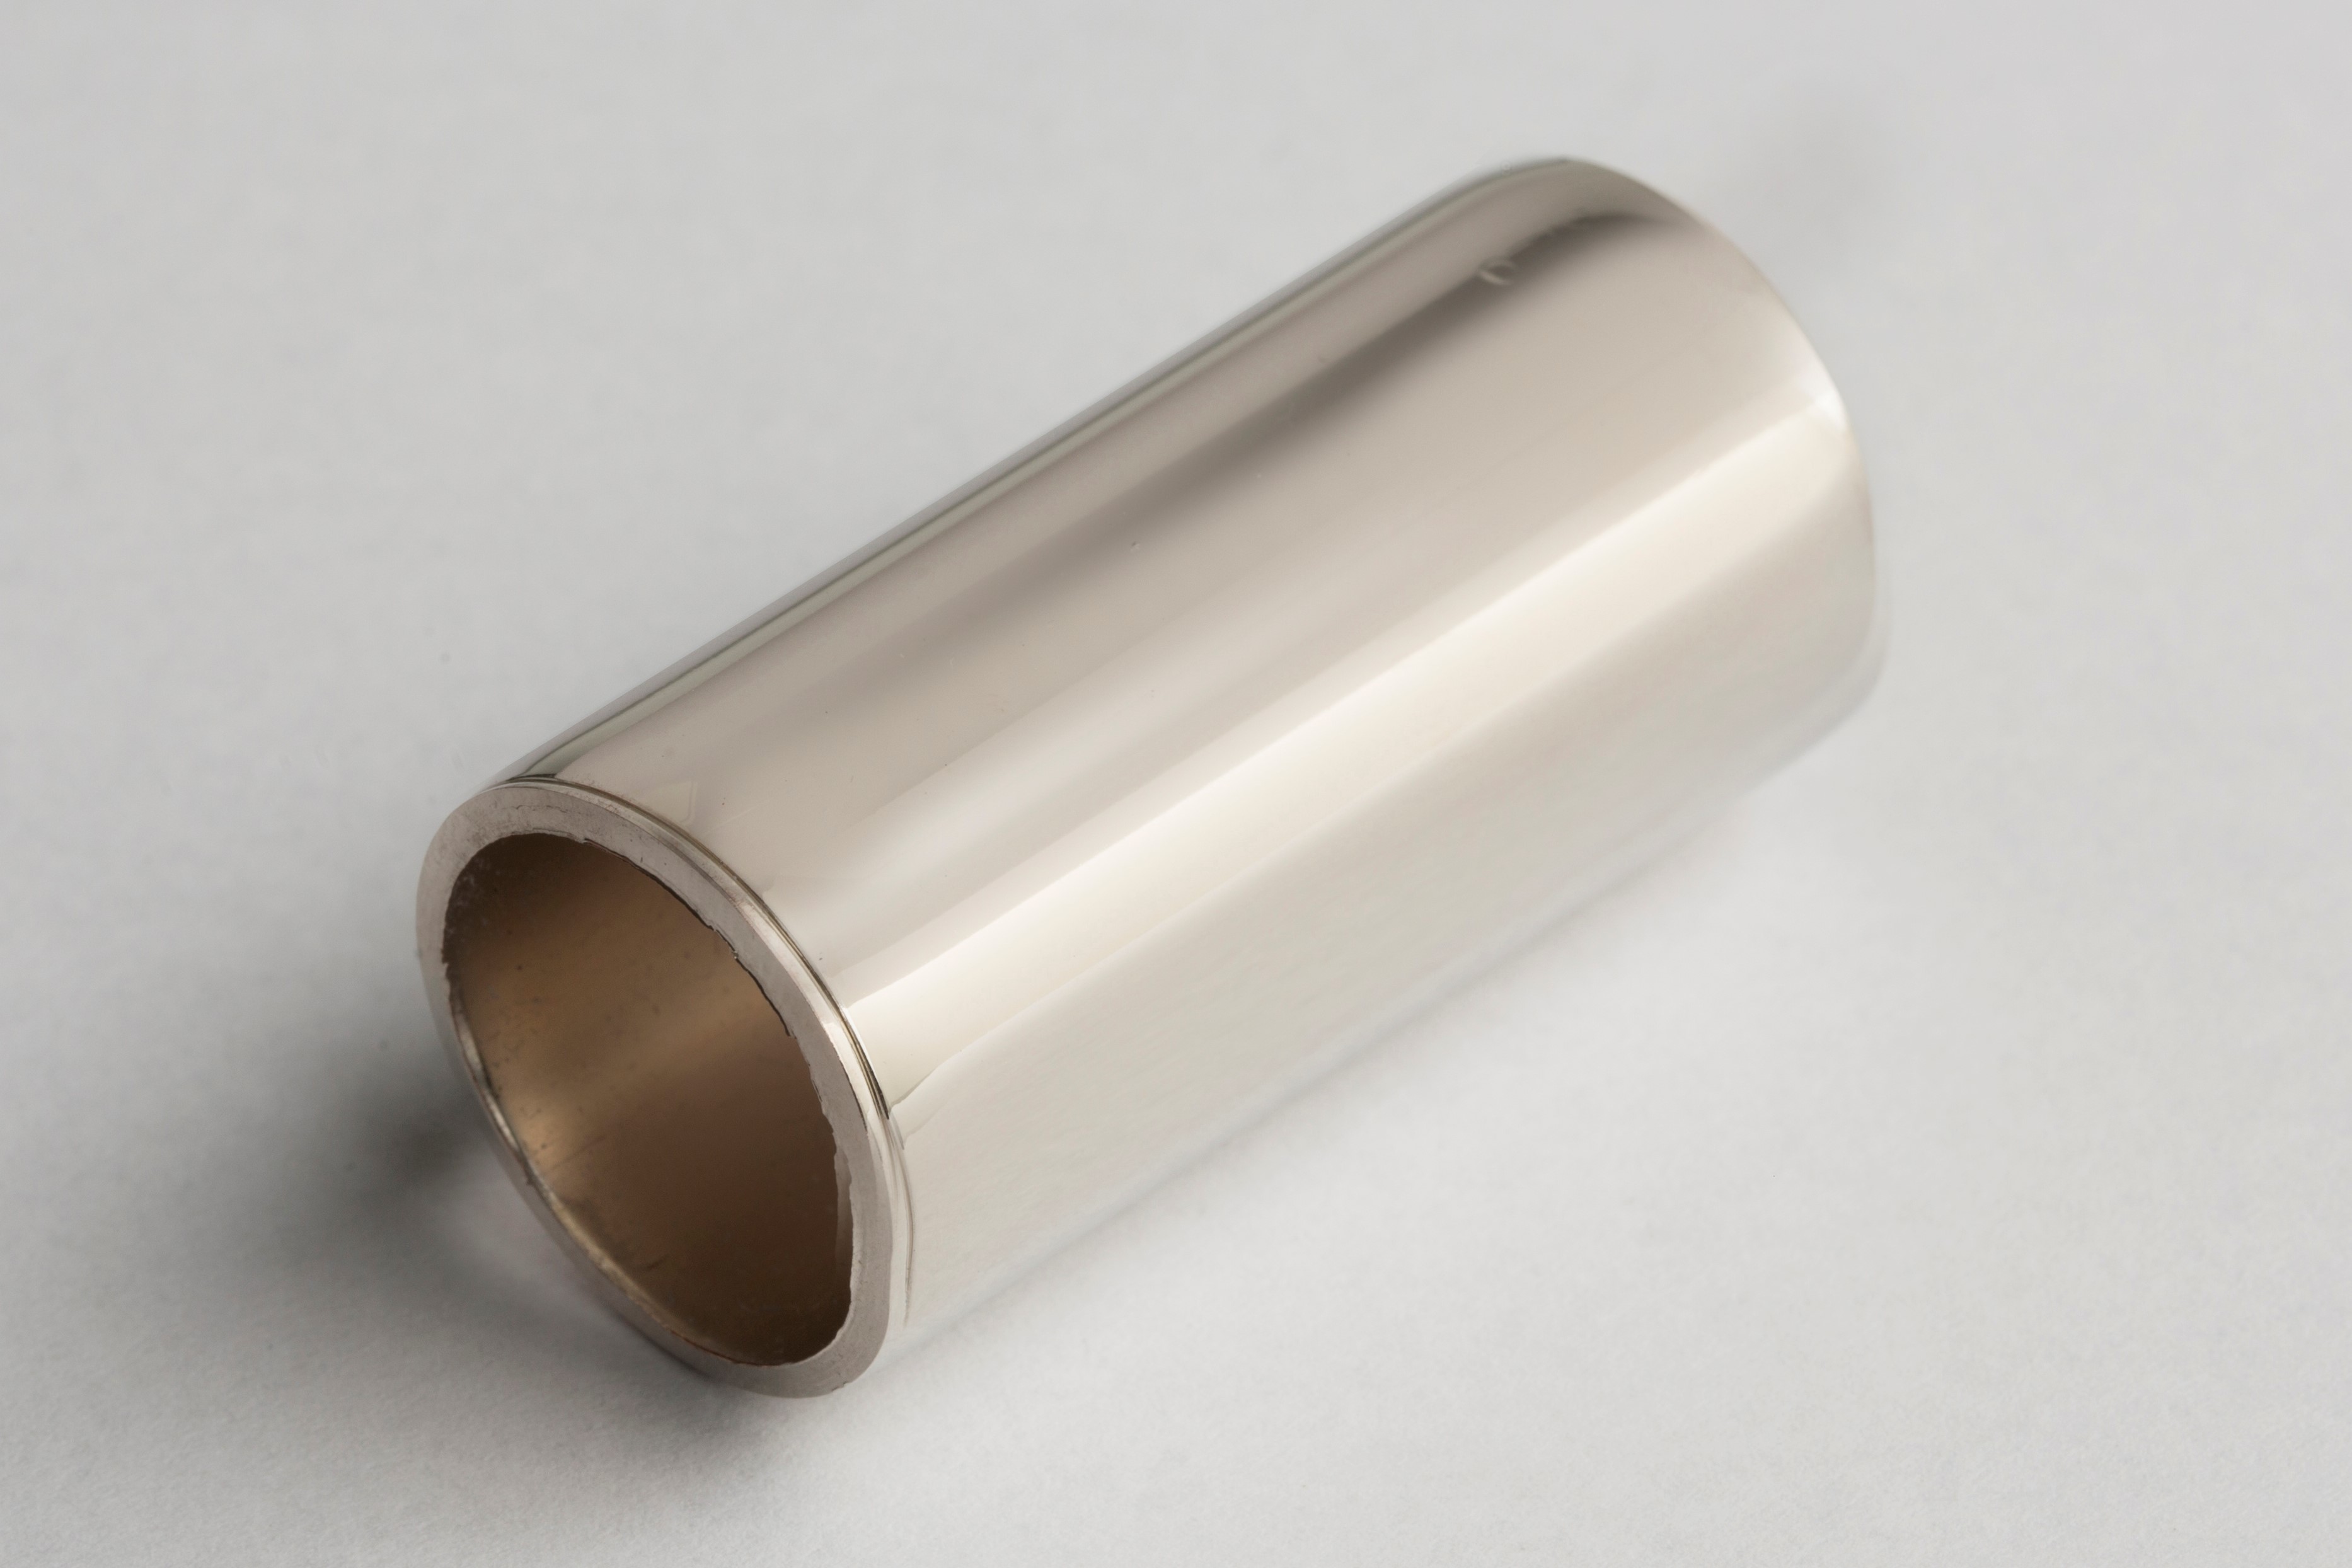 Length of metal pipe electroplated with nickel plating solution